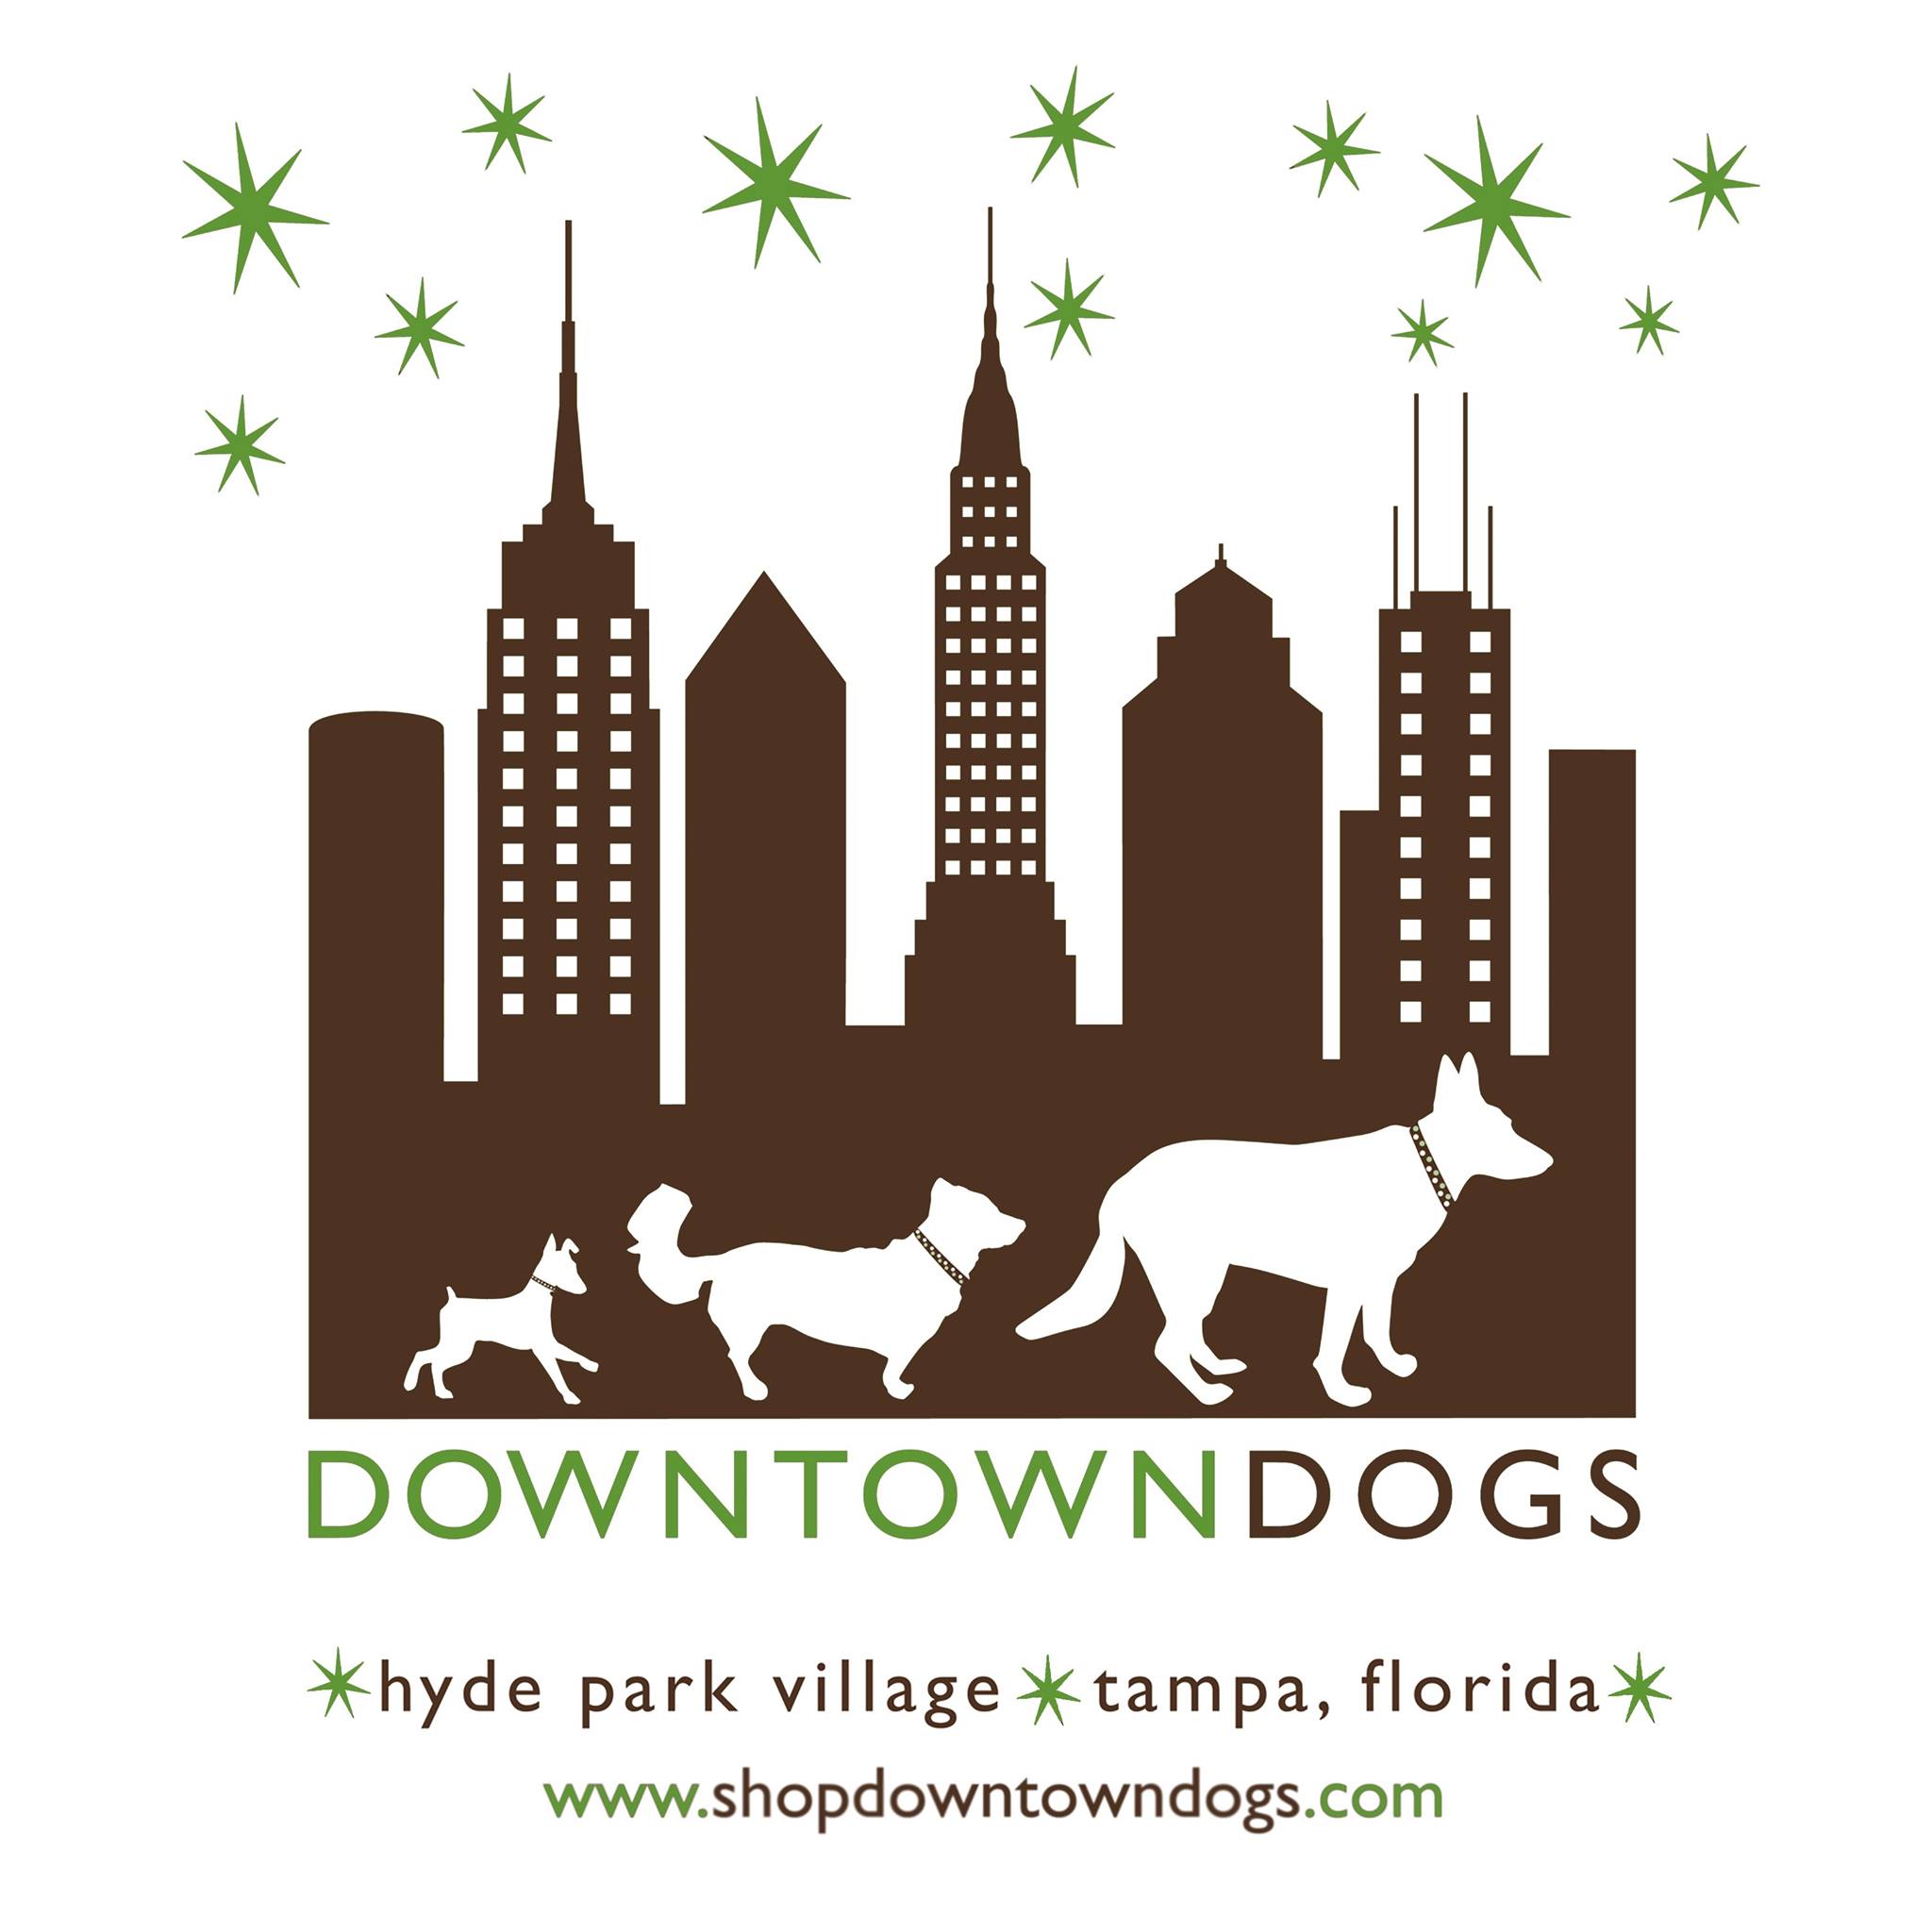 Company logo of Downtown Dogs